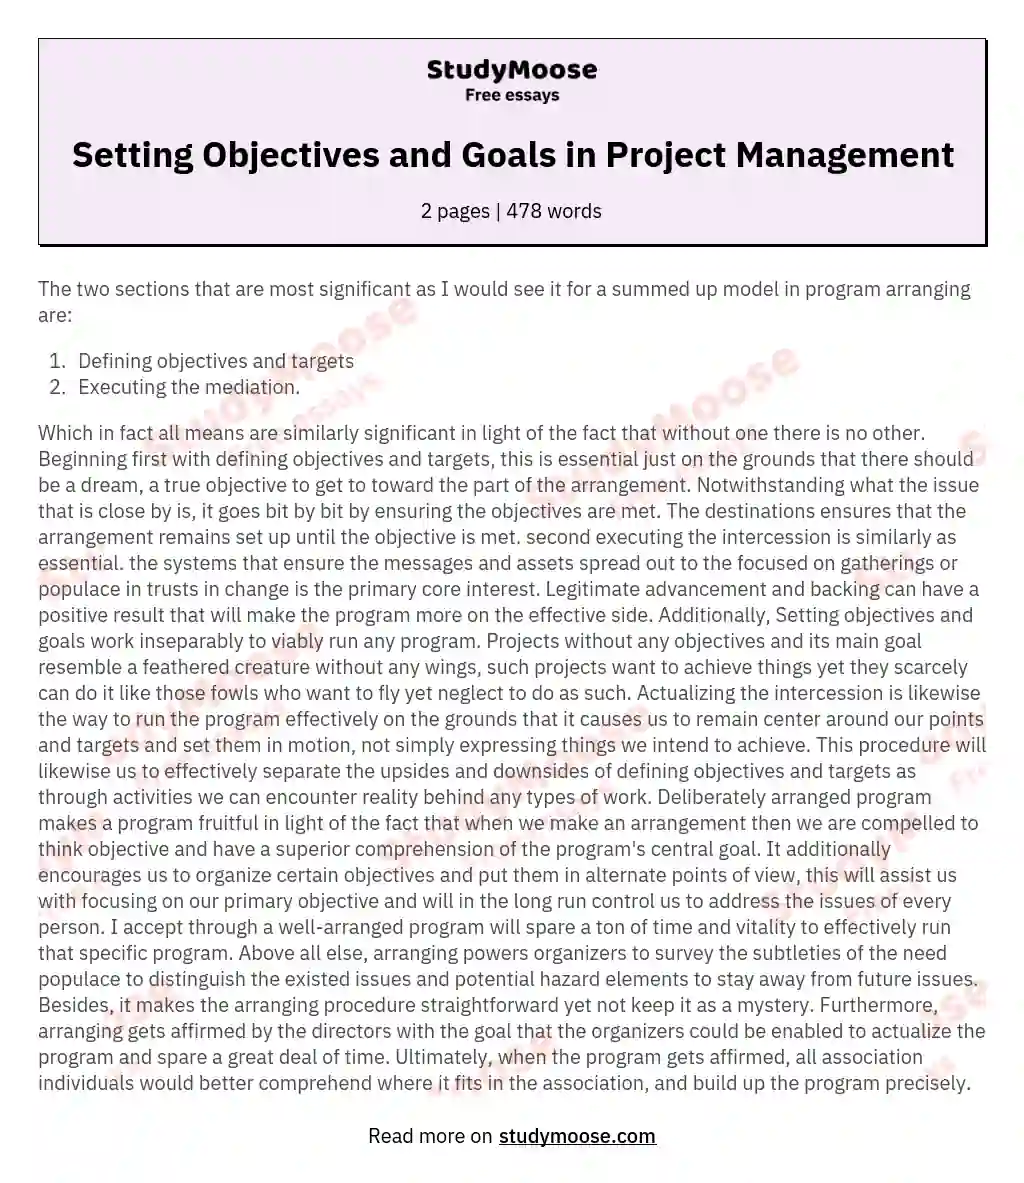 Setting Objectives and Goals in Project Management